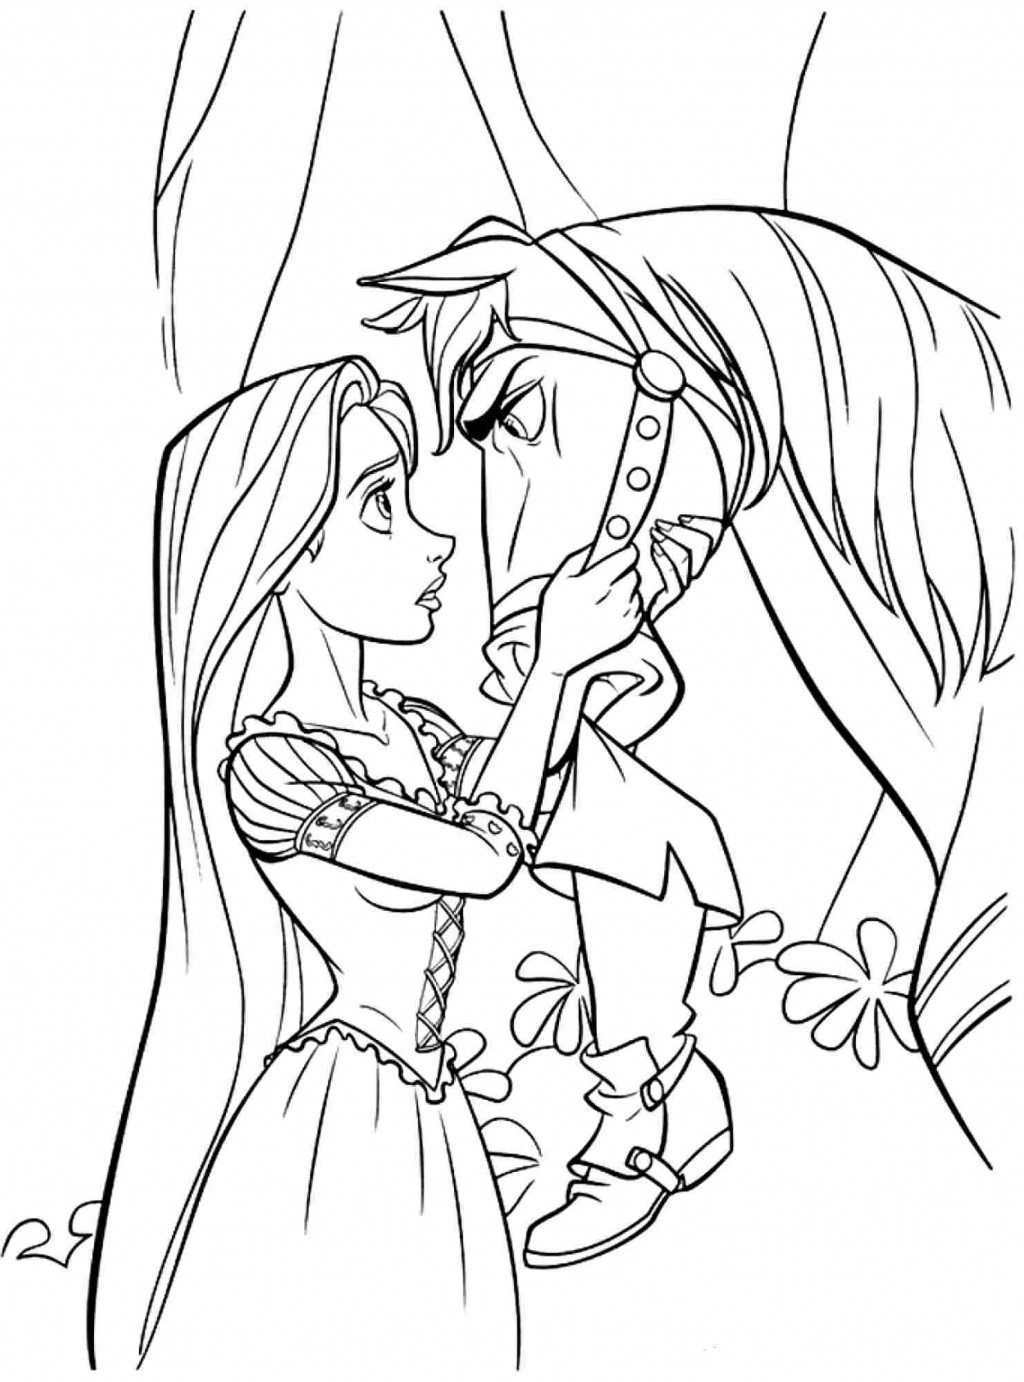 Rapunzel with a horse